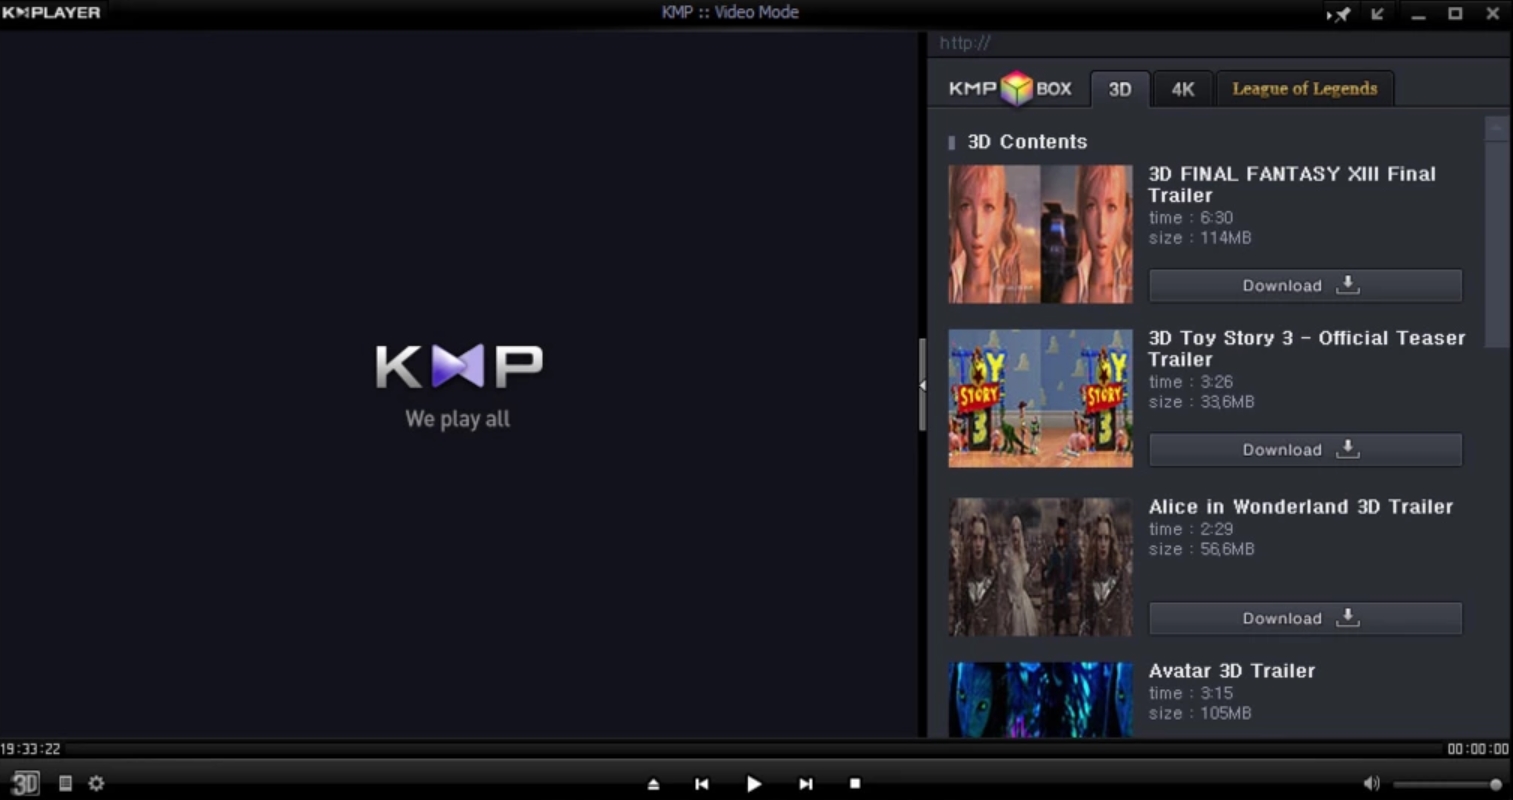 instal the last version for iphoneThe KMPlayer 2023.7.26.17 / 4.2.3.1